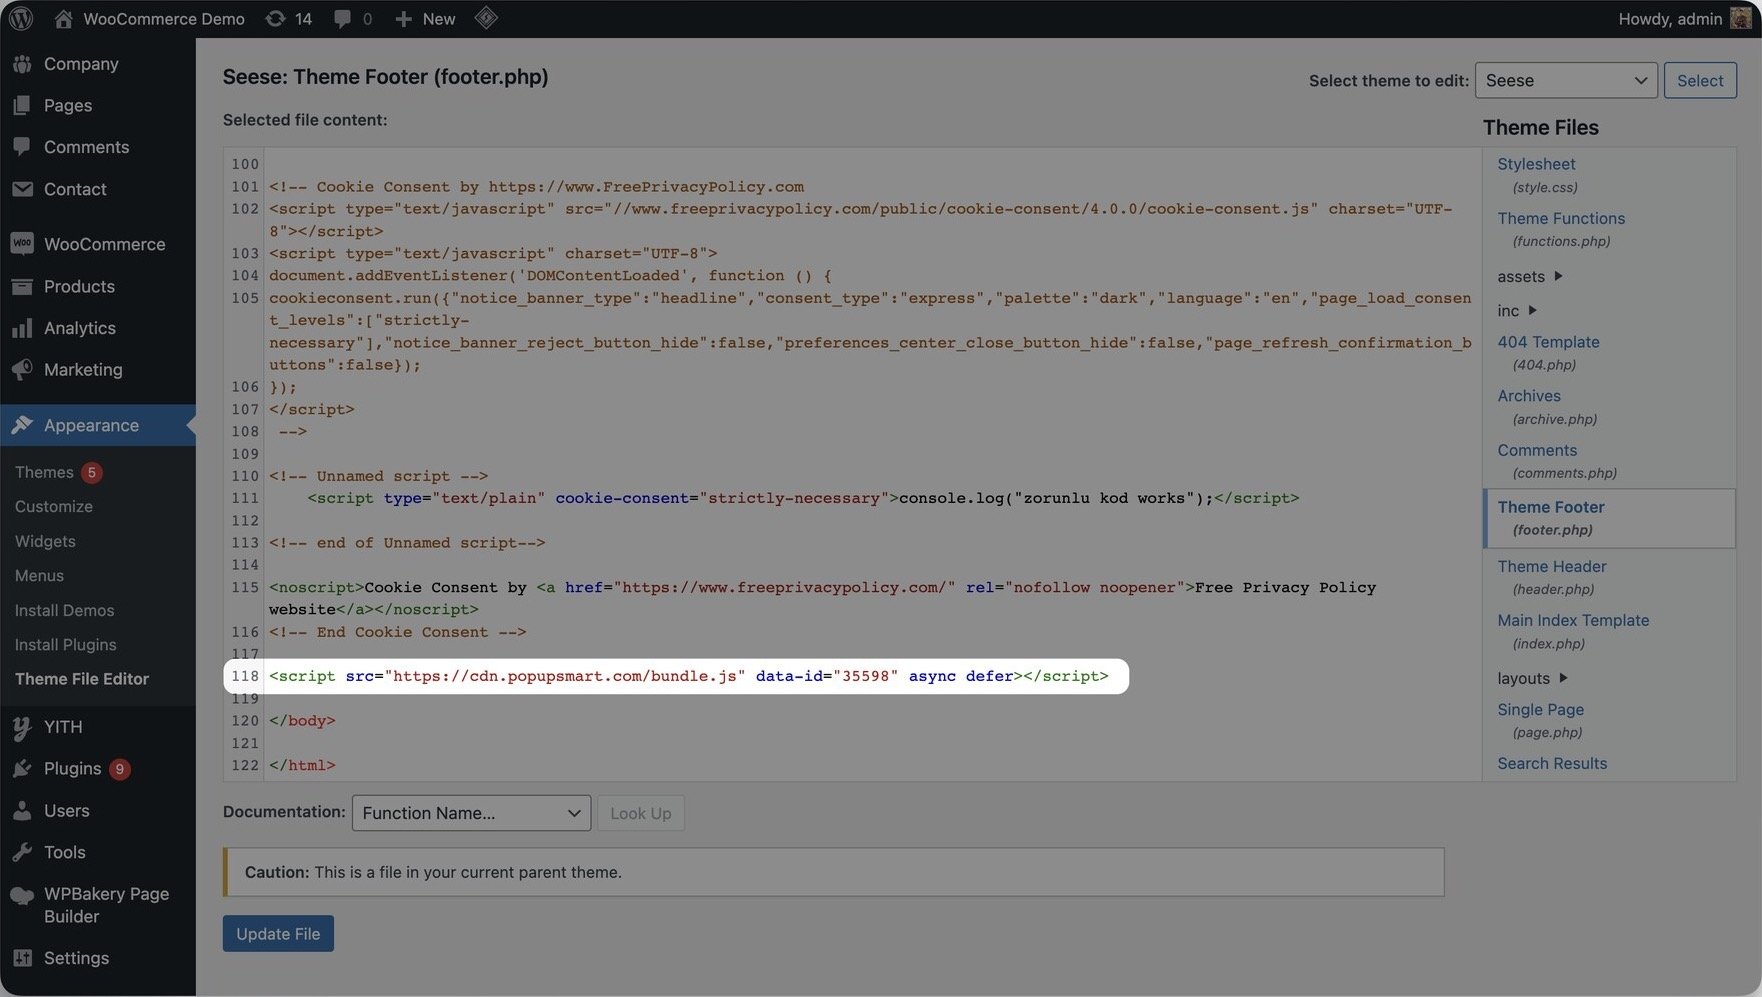 Wordpress website Admin Theme Footer section showing Popupsmart's embed code highlighted